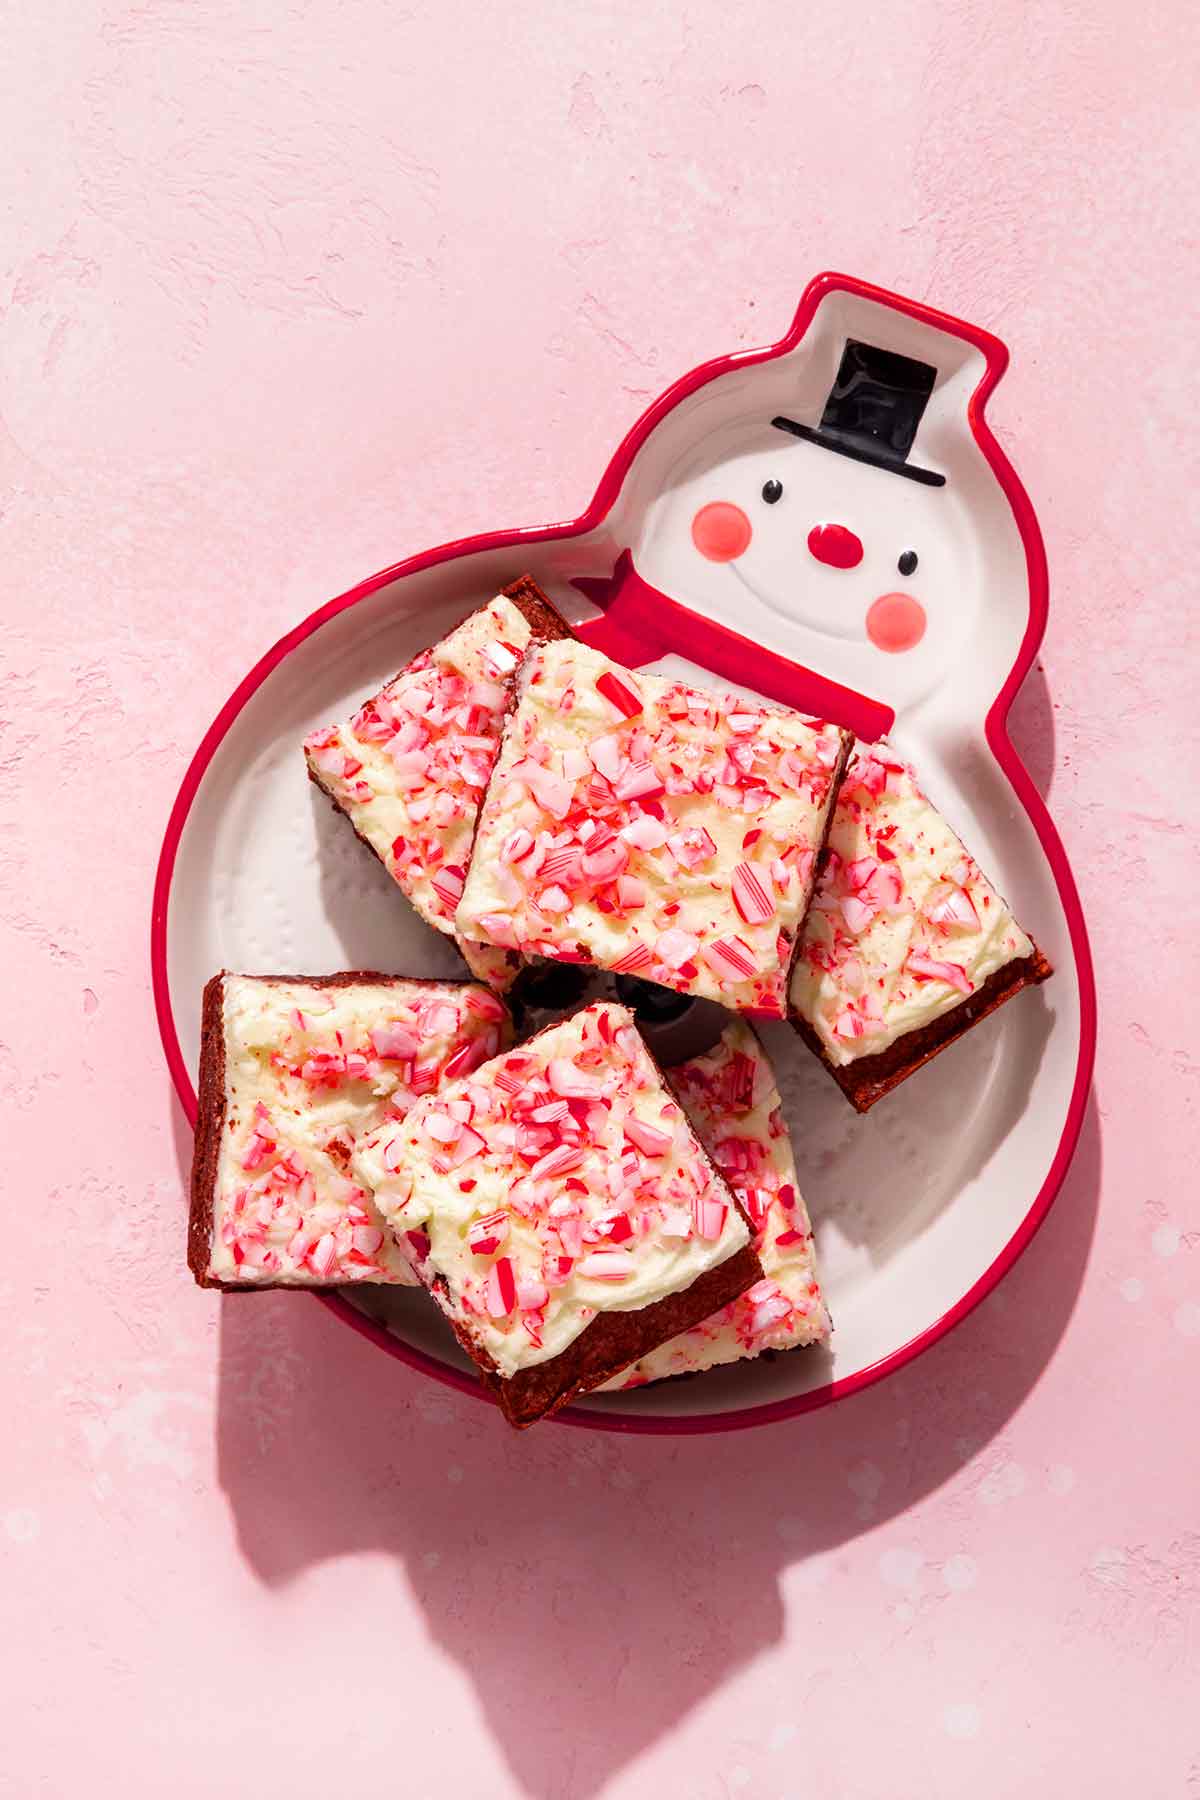 A snowman dish filled with 6 peppermint brownies on a pink background.